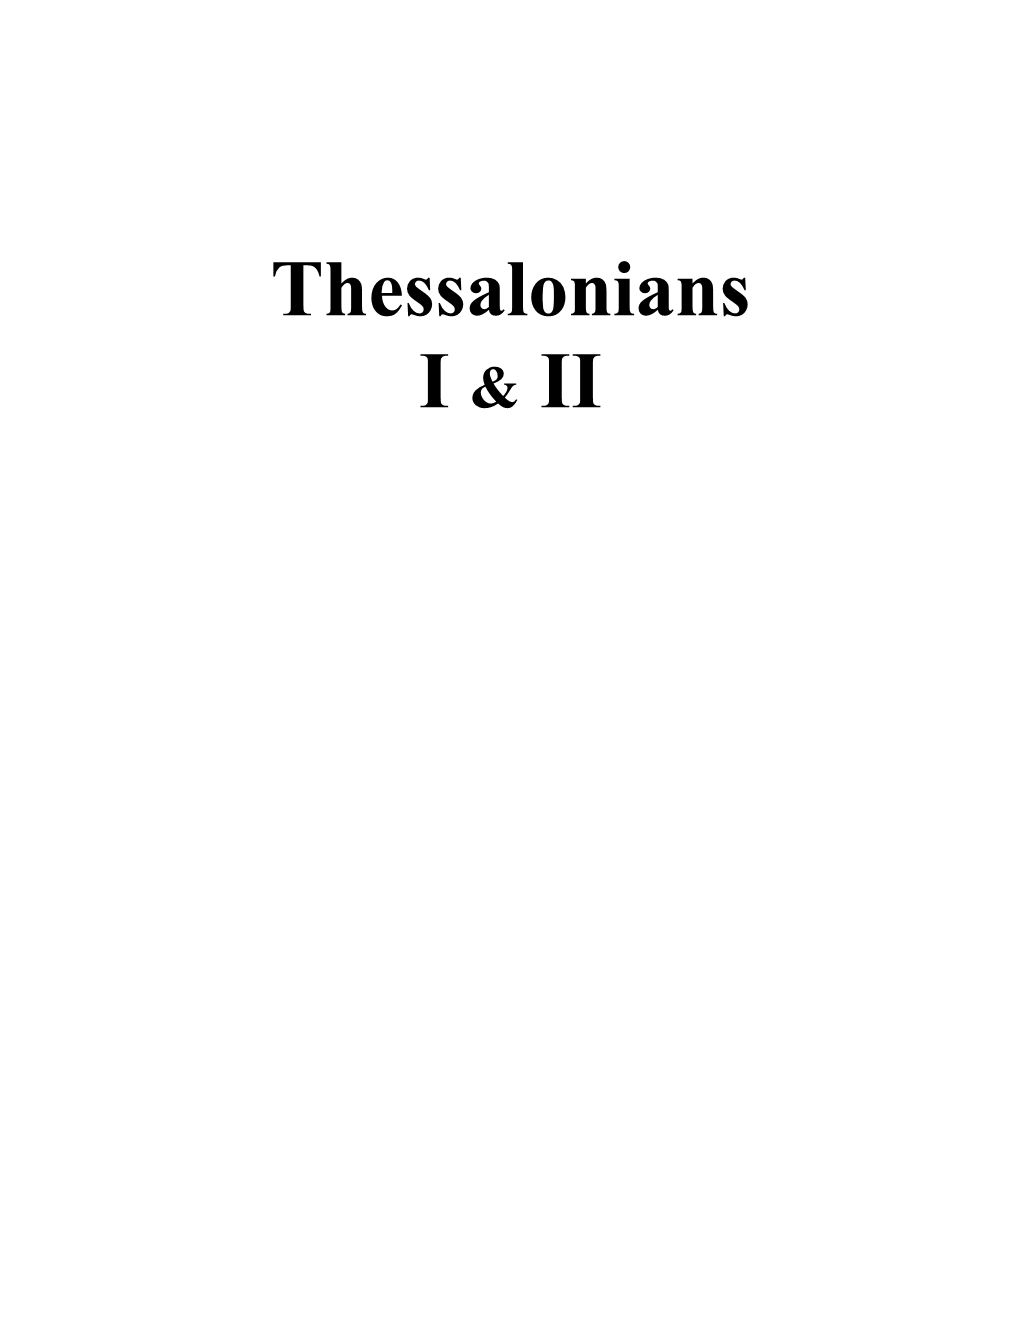 Thessalonians Corps Notes 1977-78